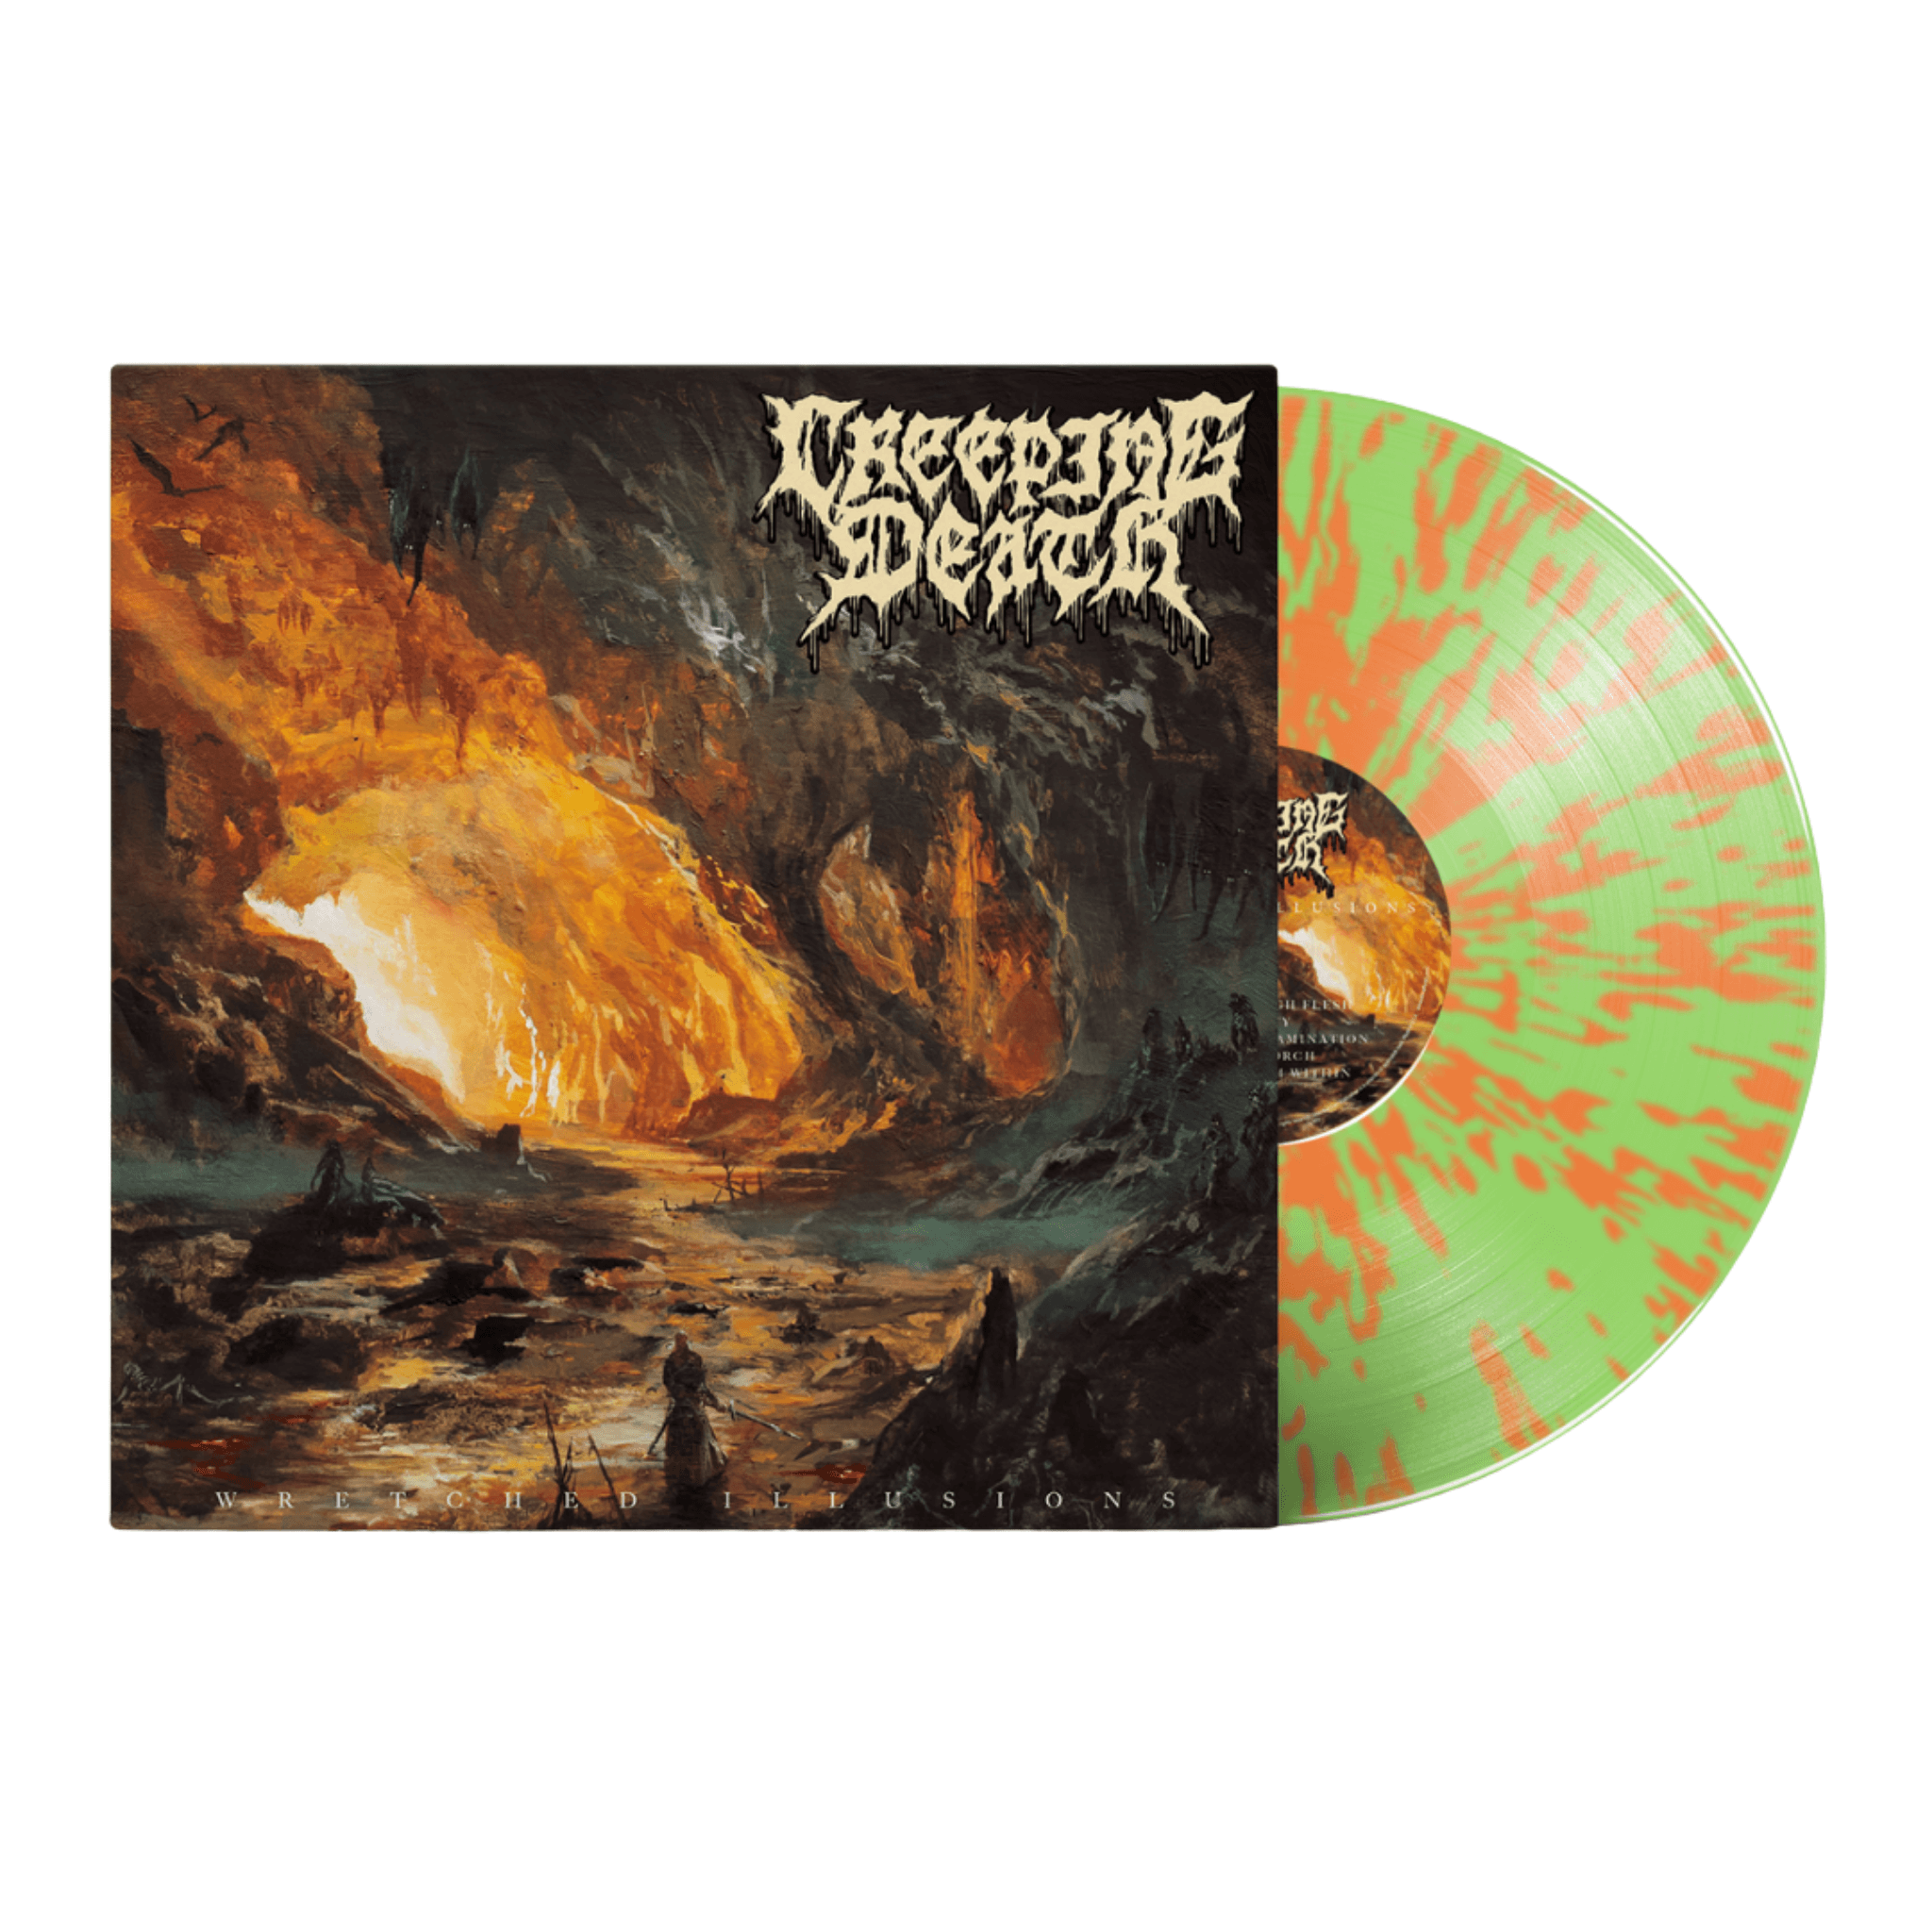 Creeping Death - "Wretched Illusions" Glow In The Dark Splatter Vinyl (Blemished)